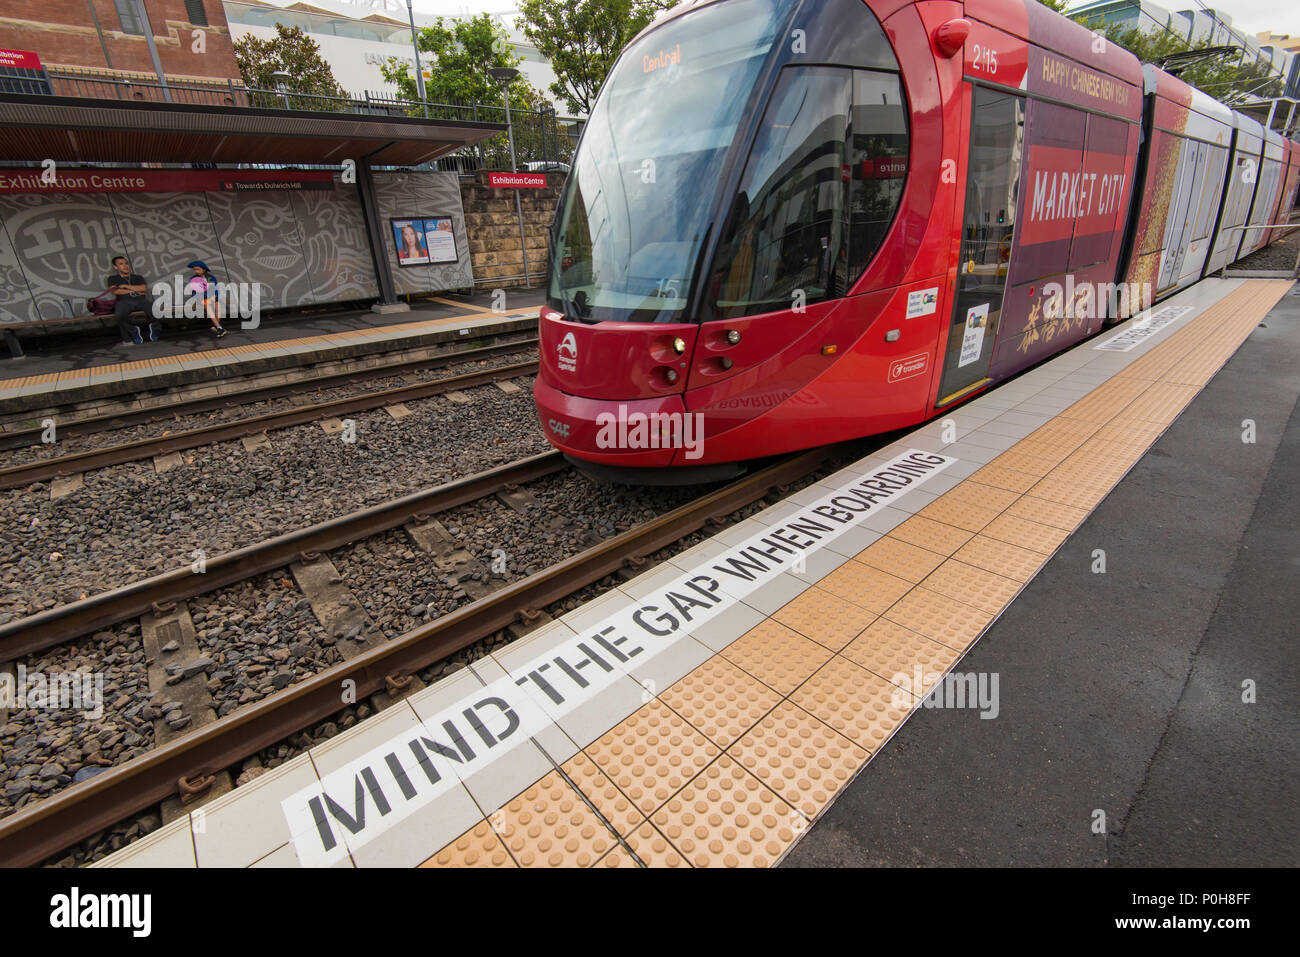 A Mind the Gap warning sign on the platform of a Sydney Light Rail train or tram at the Exhibition Centre station in Sydney, Australia Stock Photo